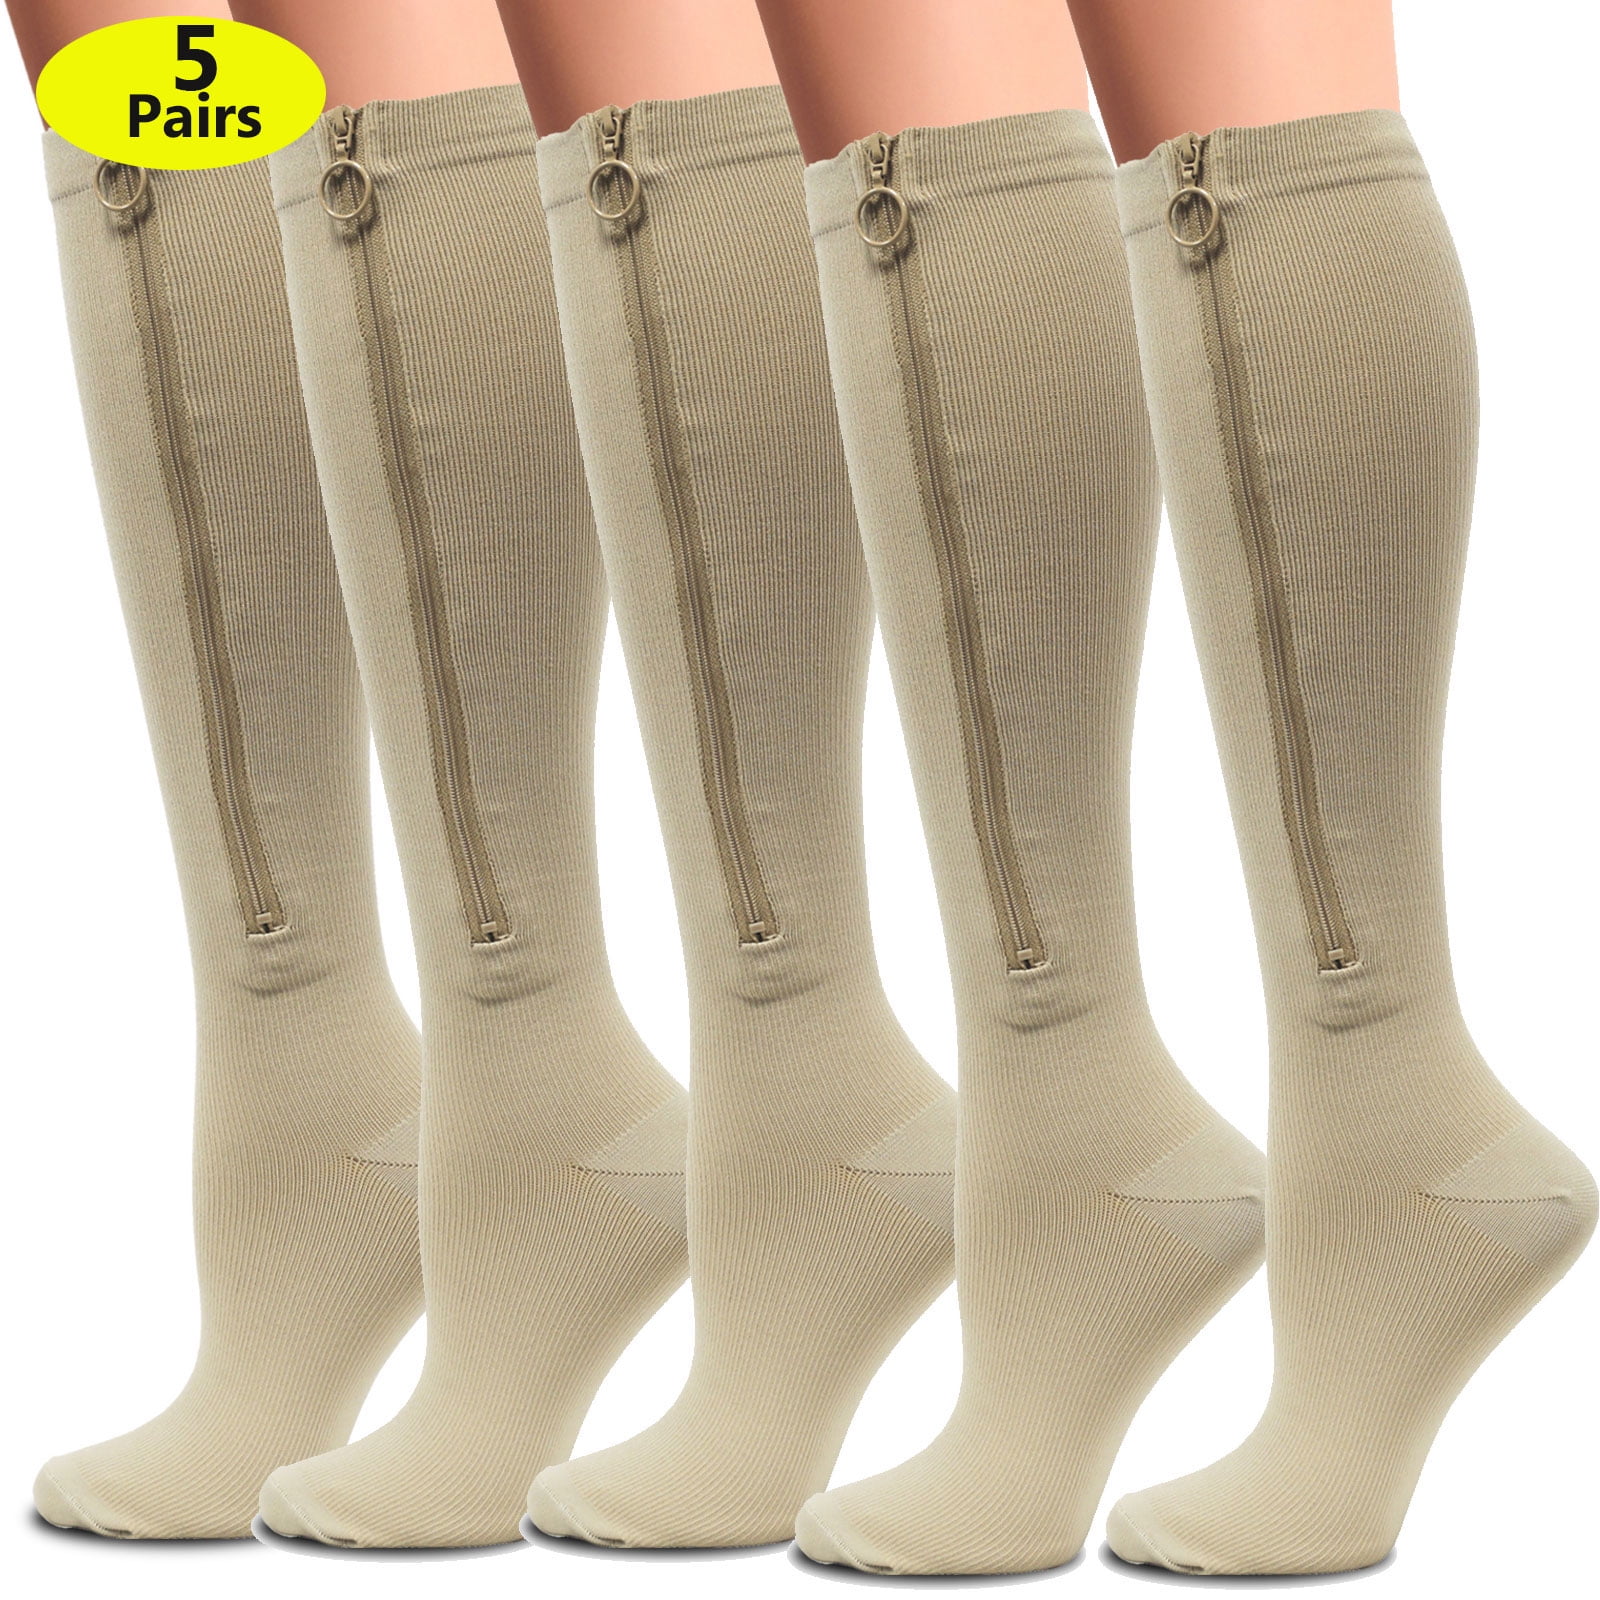 Aosijia Zipper Compression Socks 3 Pack Zip Up Circulation Pressure Stockings  Zipper Knee High for Support Reduce Swelling and Better Circulation for Men  Women Black S/M 